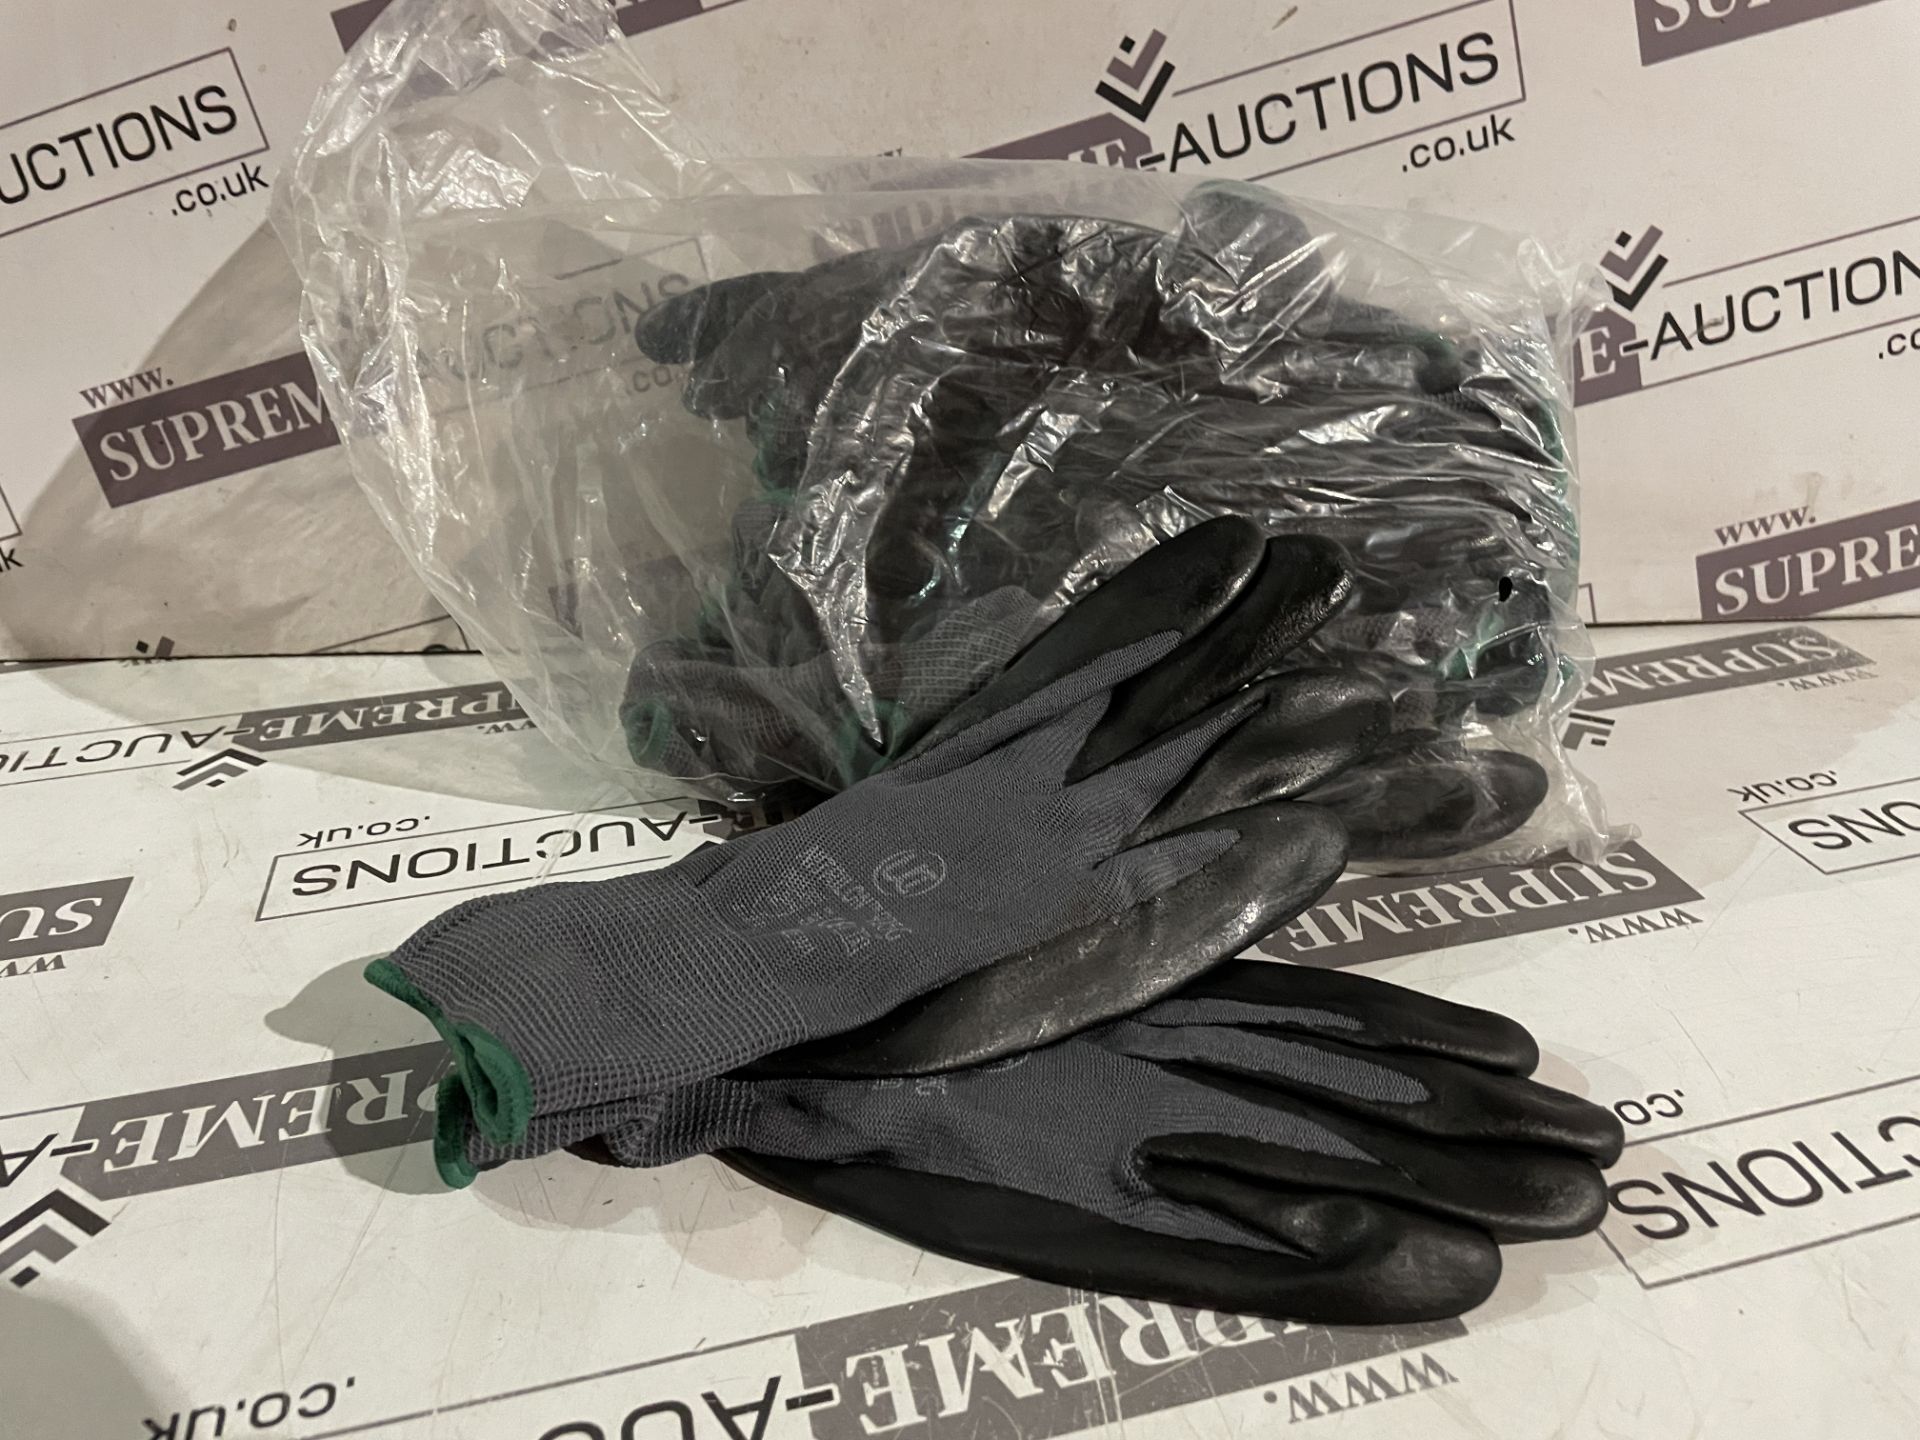 120 X BRAND NEW PAIRS OF NITRILON BLACK AND GREY PROFESSIONAL WORK GLOVES SIZE LARGE R9-6